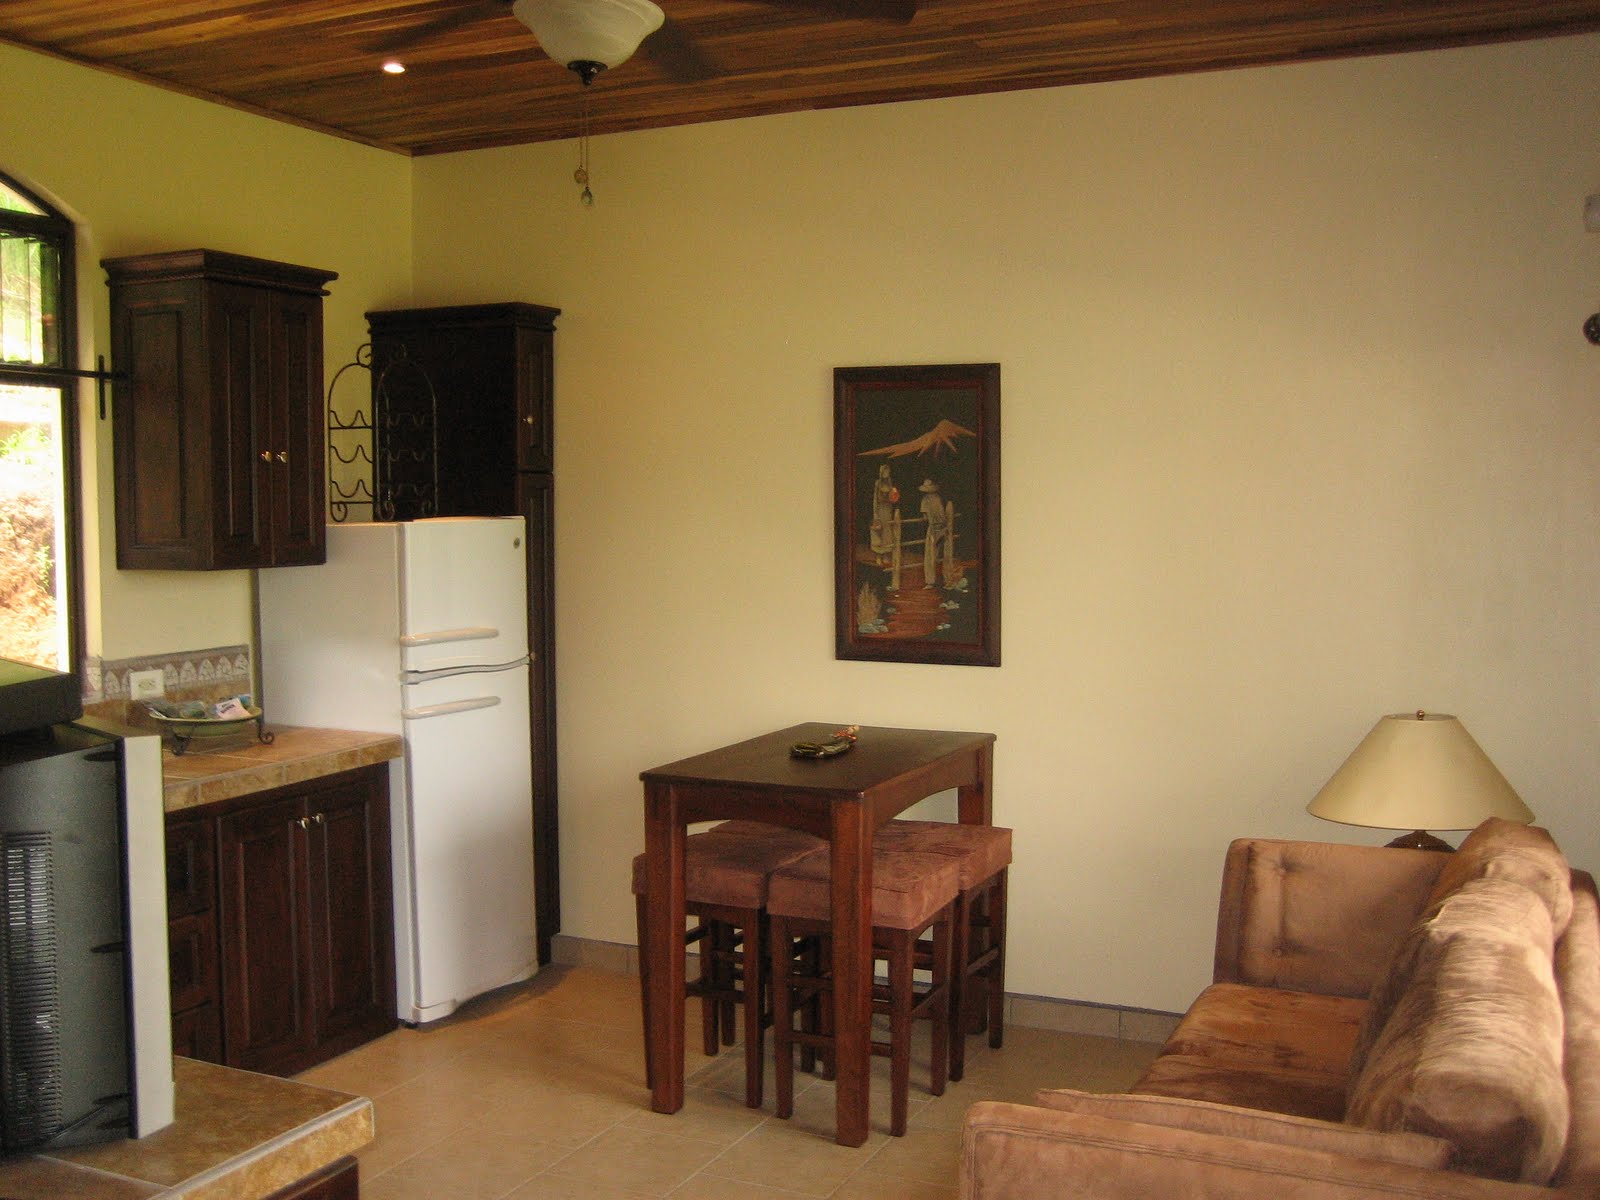 Each Apartment Hosts A Very Spacious Kitchen And Living Area With All